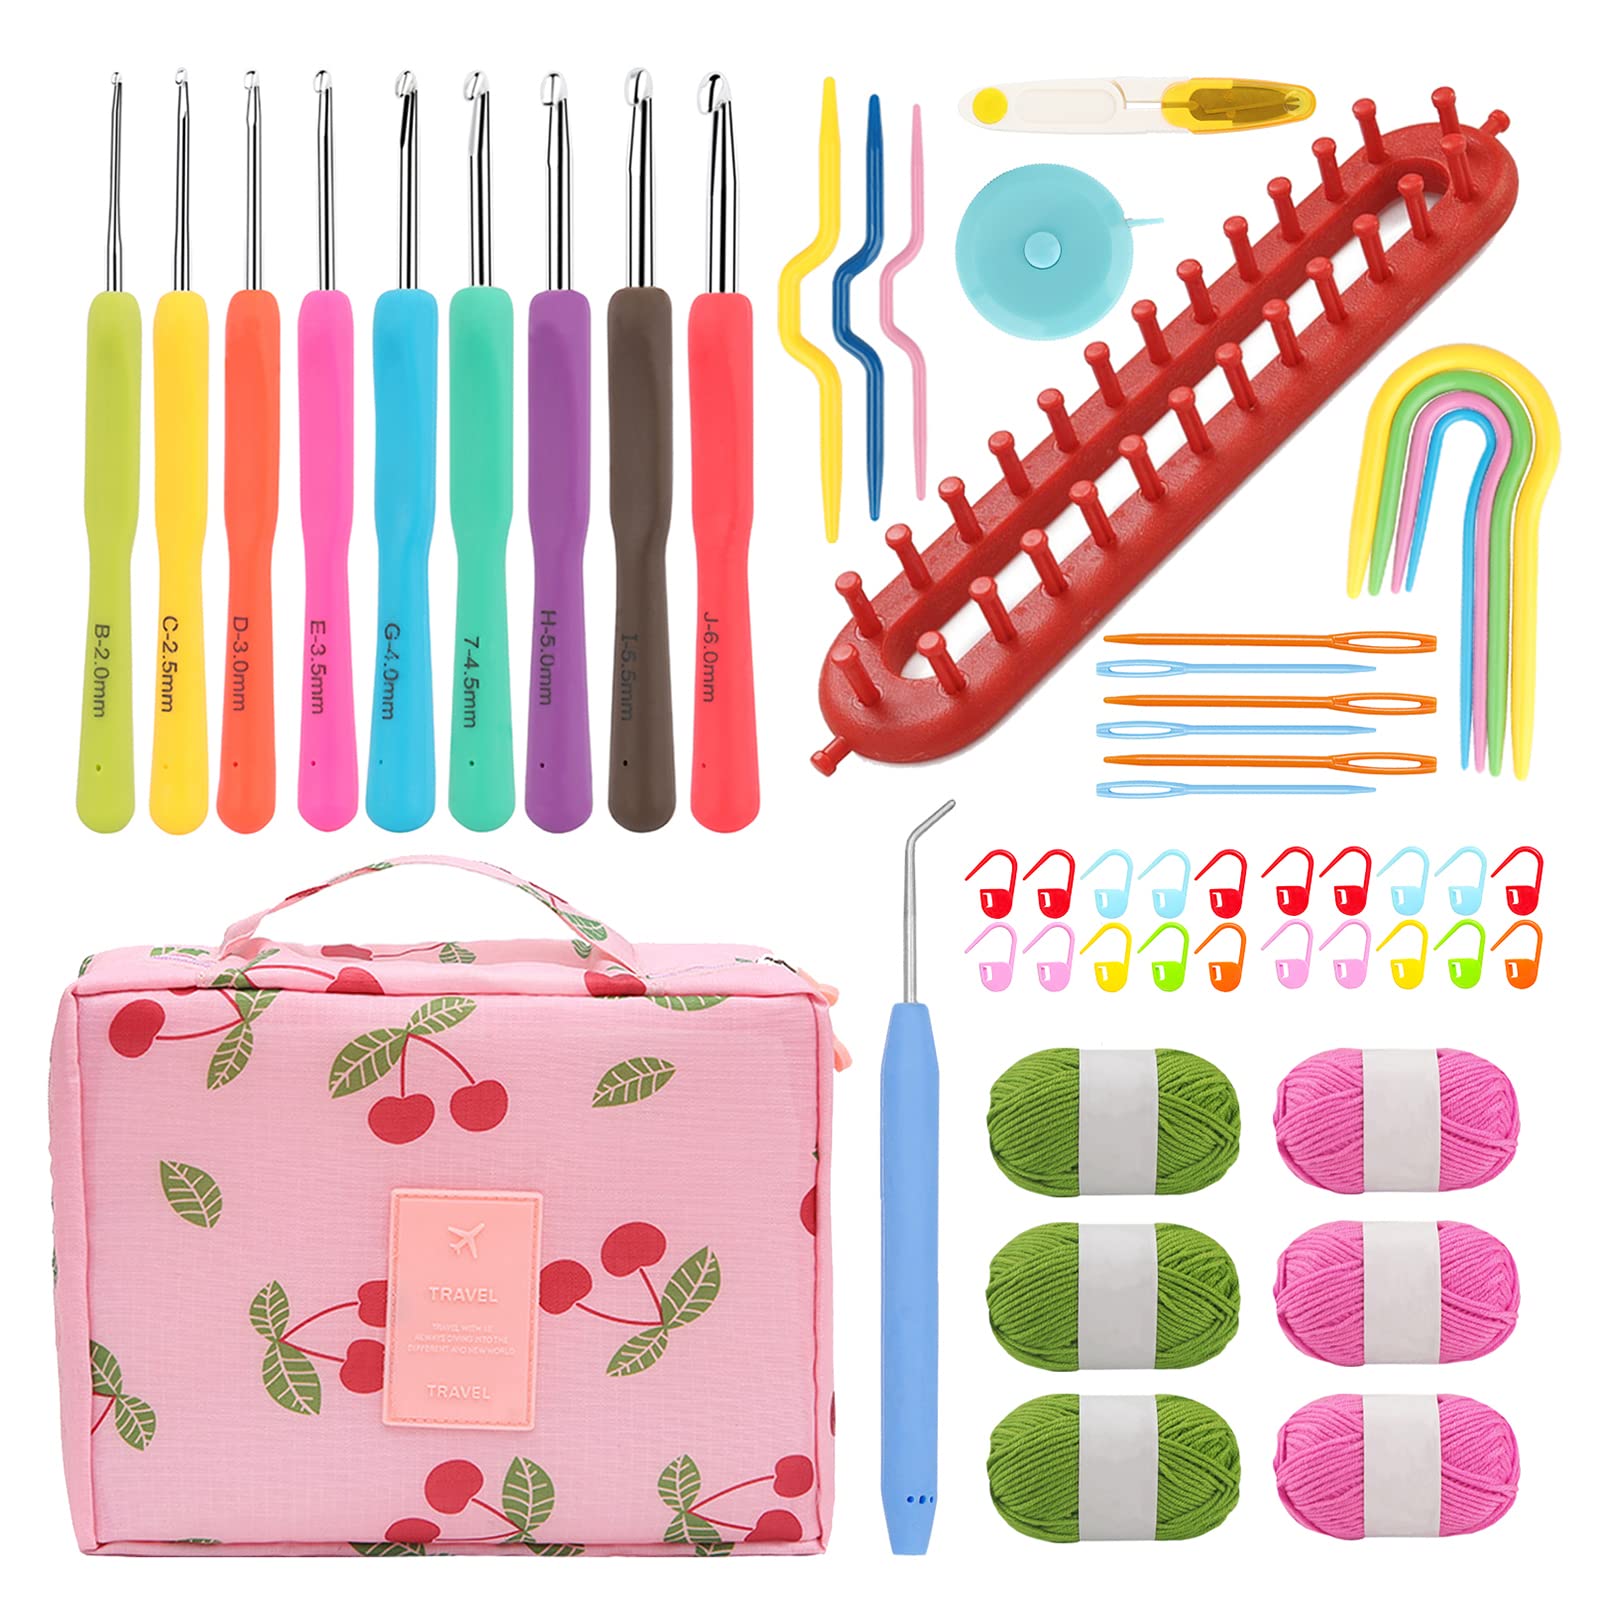 2.0-6.0mm Pink Crochet Hook Knitting Needles Set With Cover And